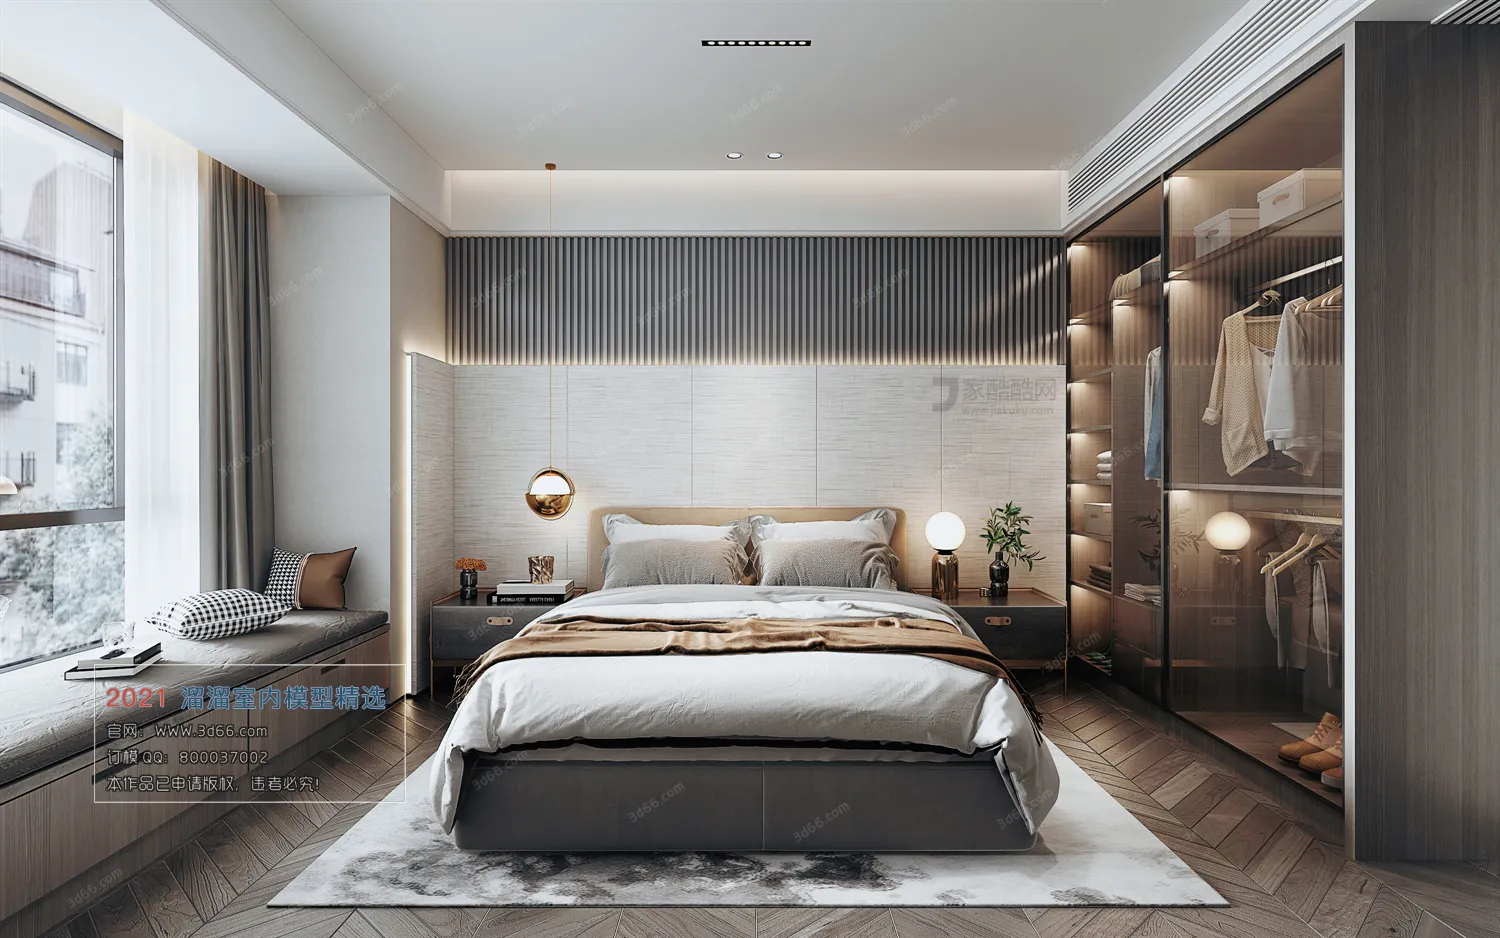 BEDROOM – A024-Modern style-Vray model